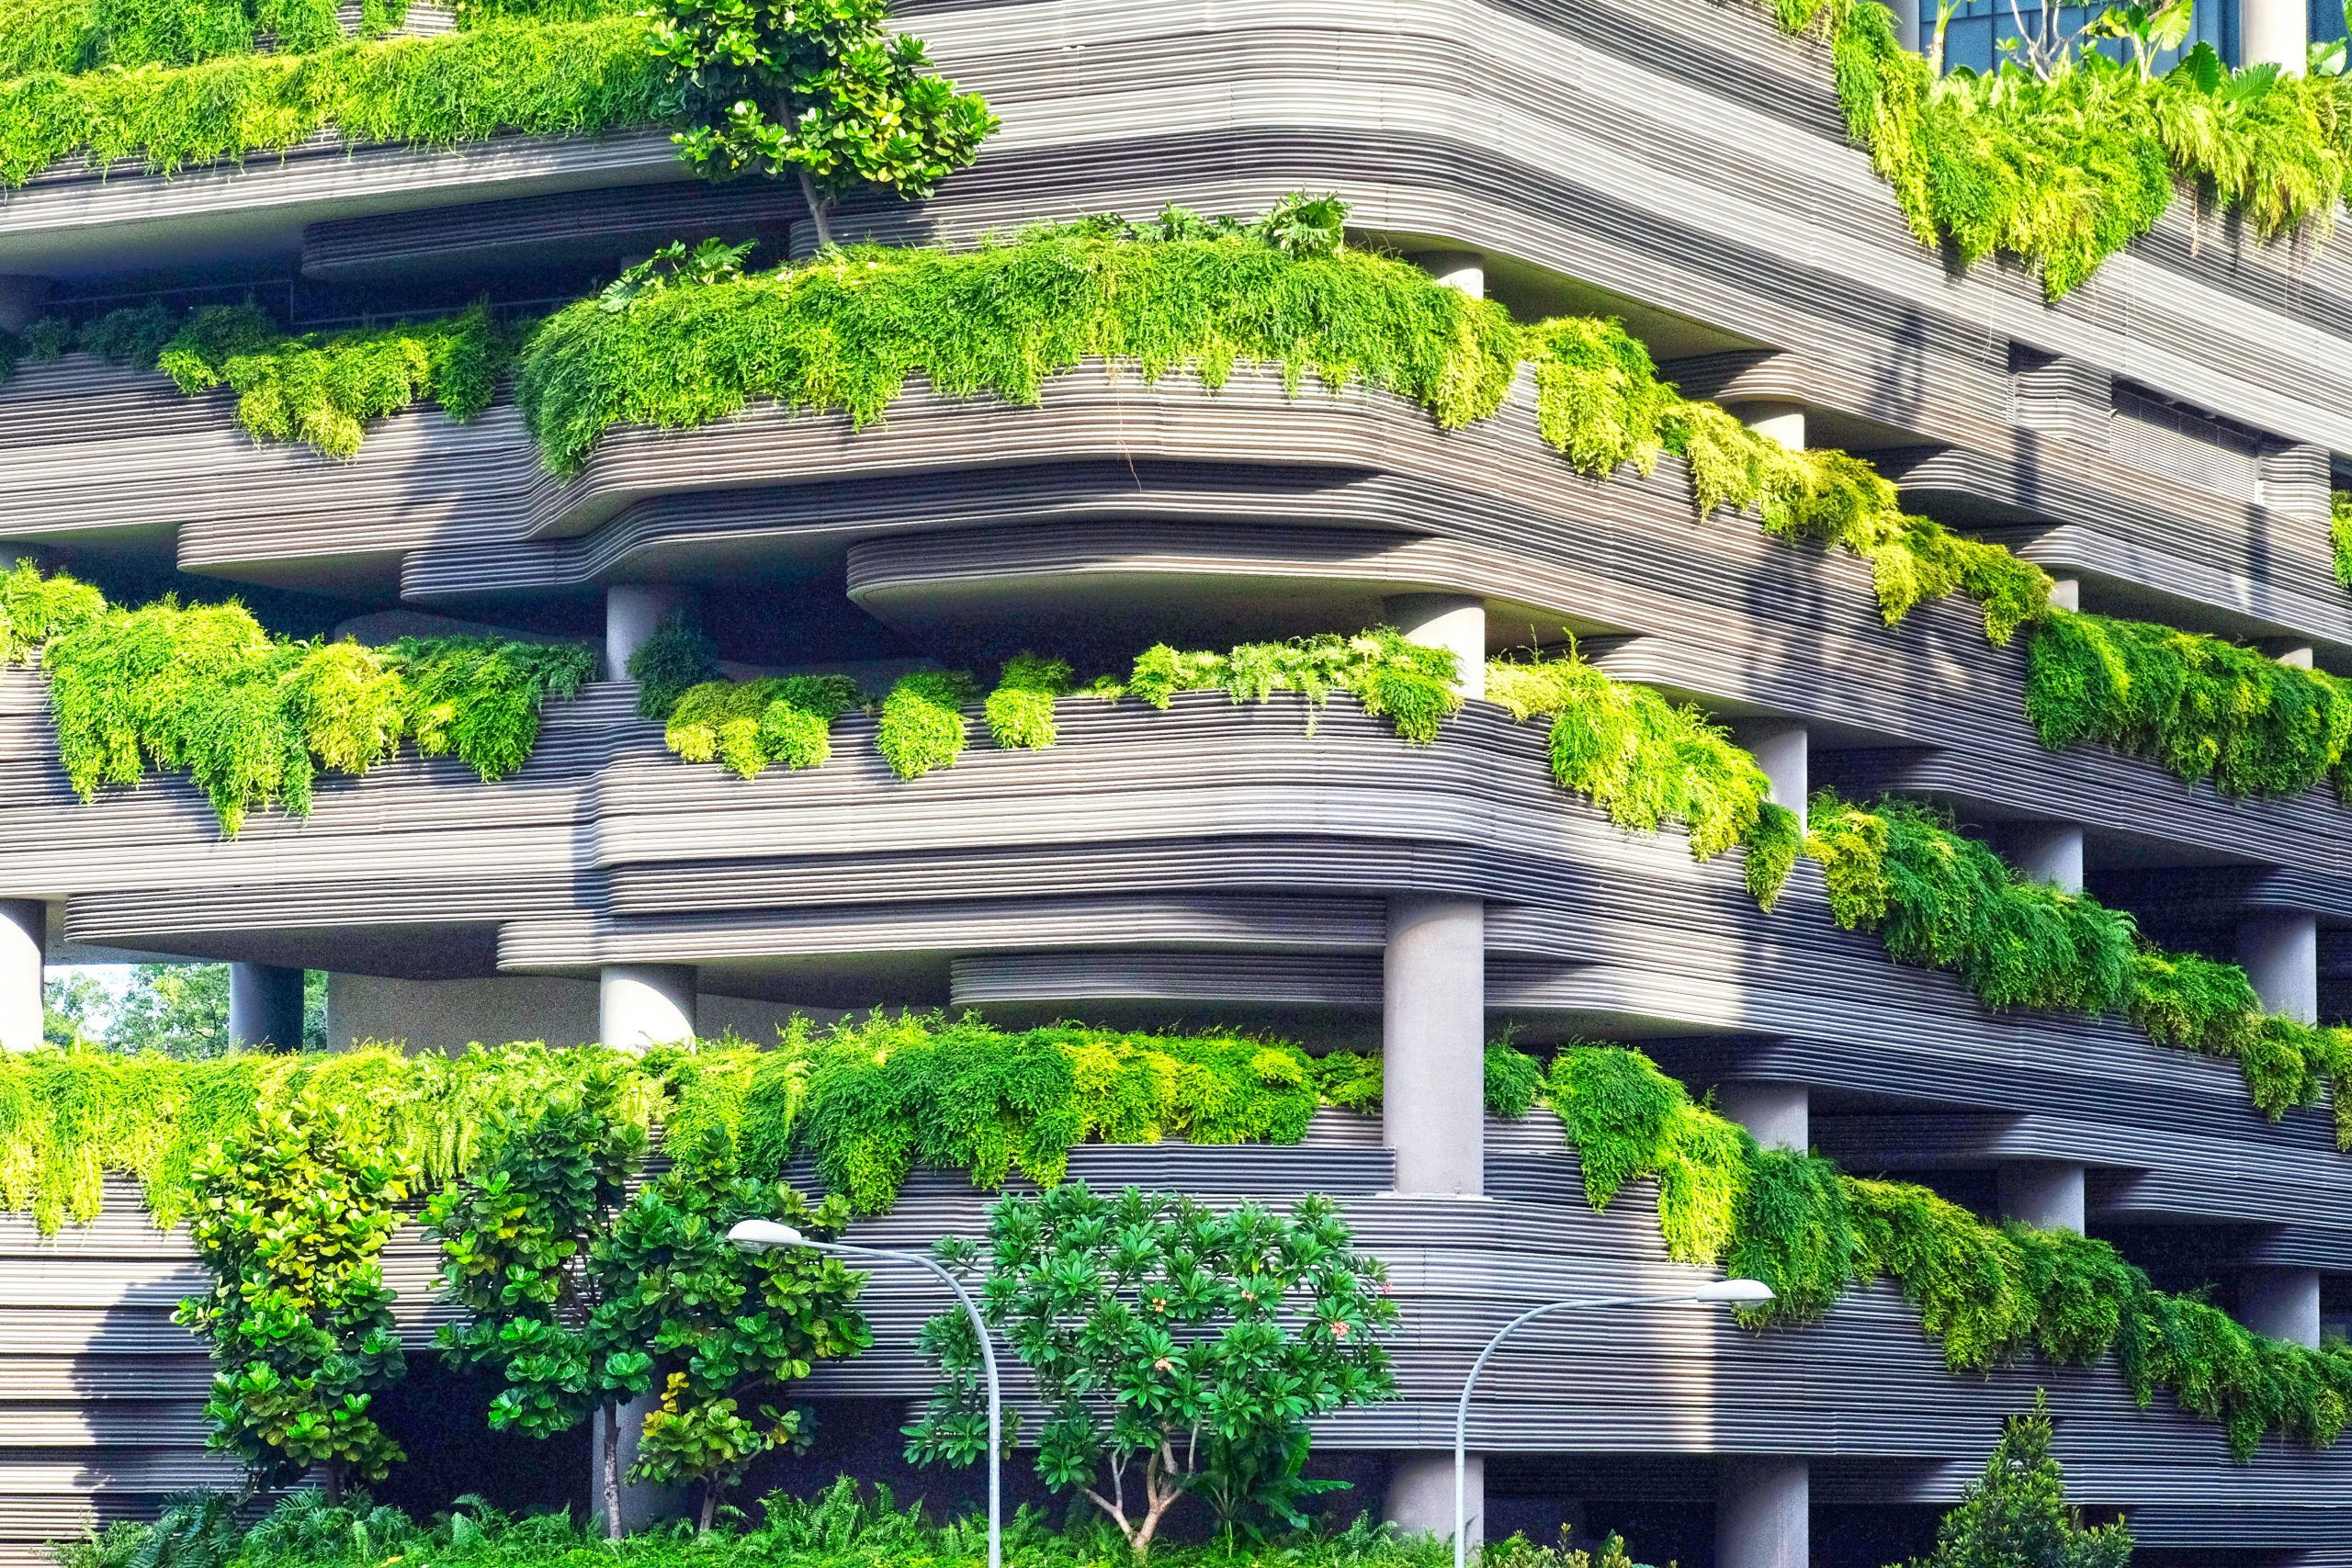 how does sustainable architecture address climate change